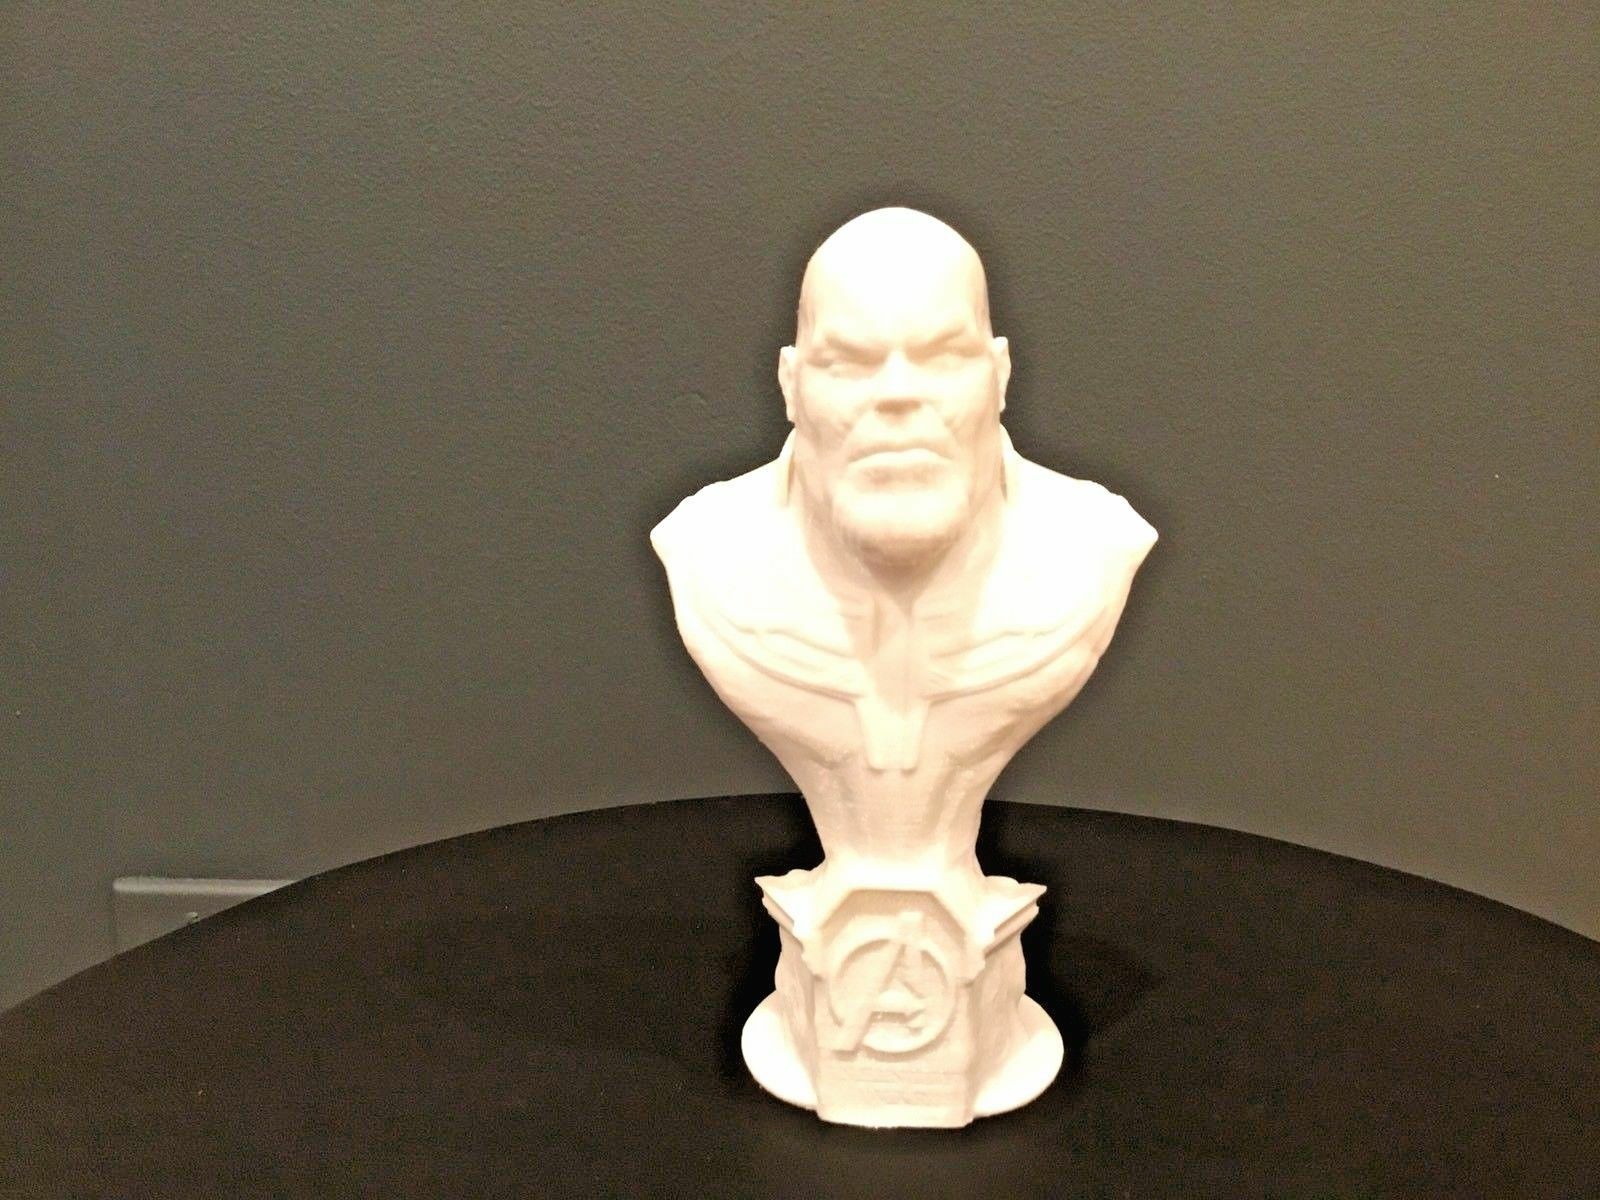 New Collector Hobby Large Thanos The Avengers 3 Infinity War Bust Statue Model 